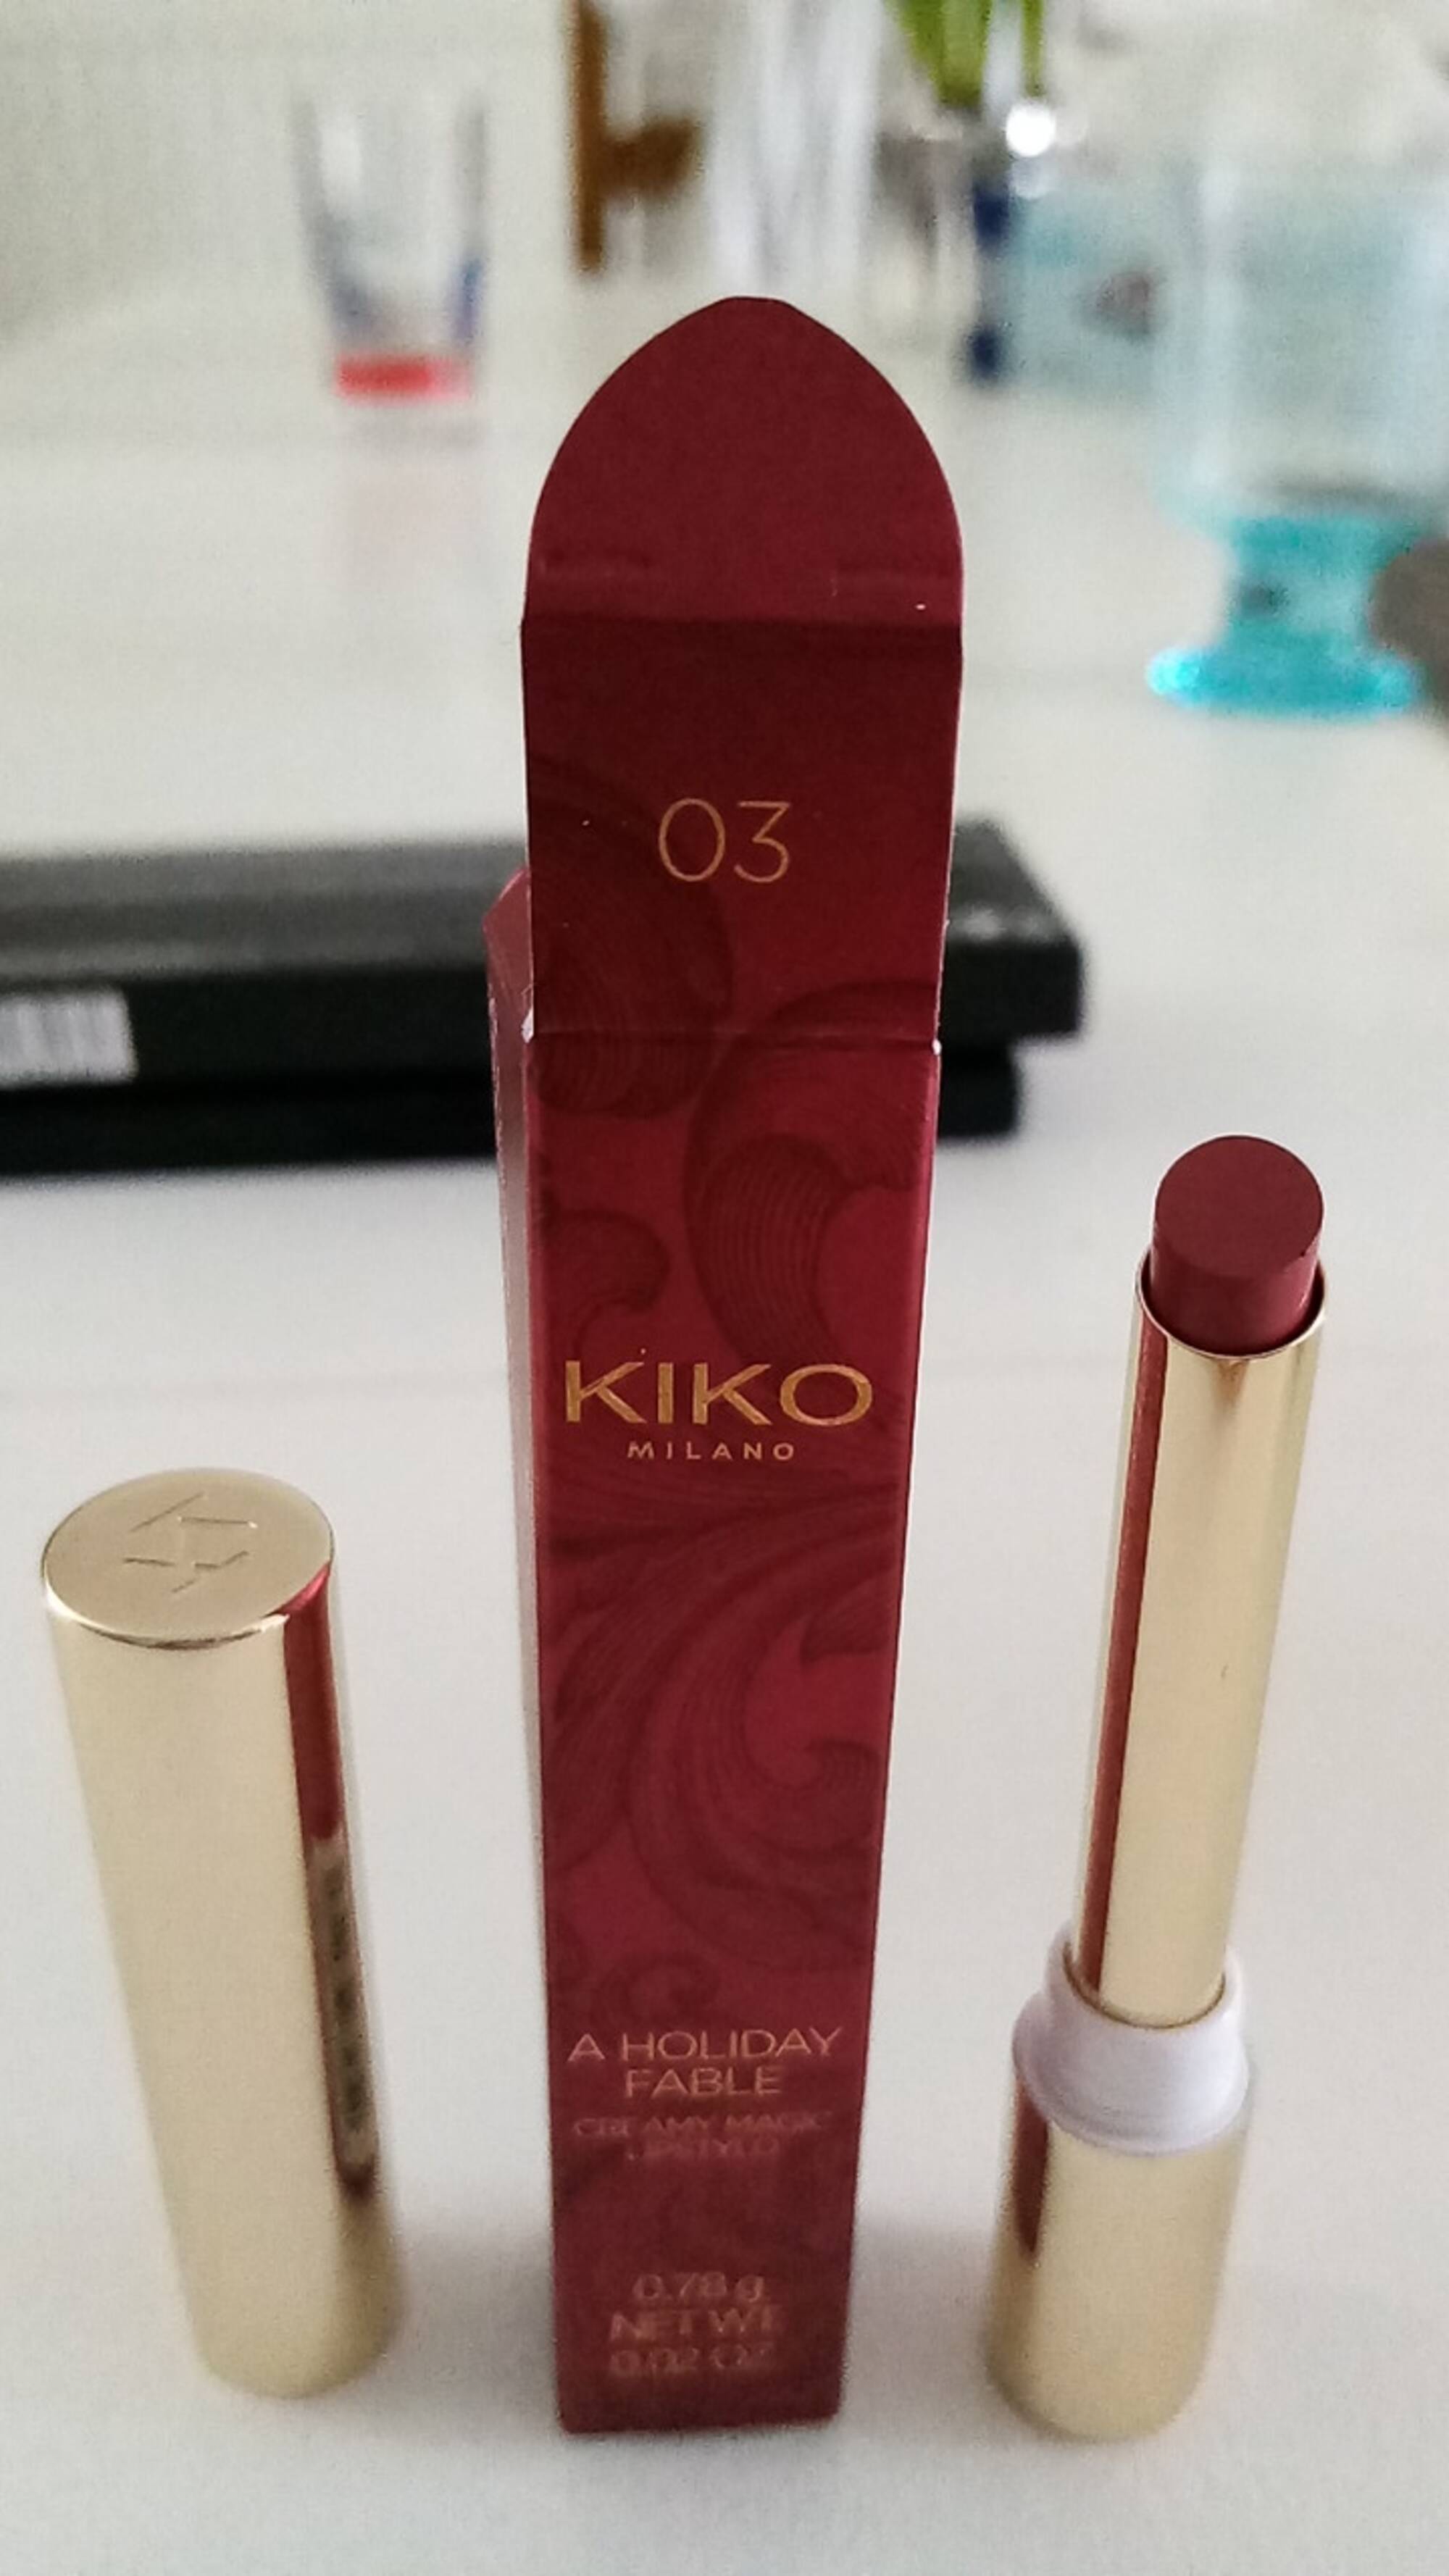 KIKO MILANO - A holiday fable - Rouge à lèvres